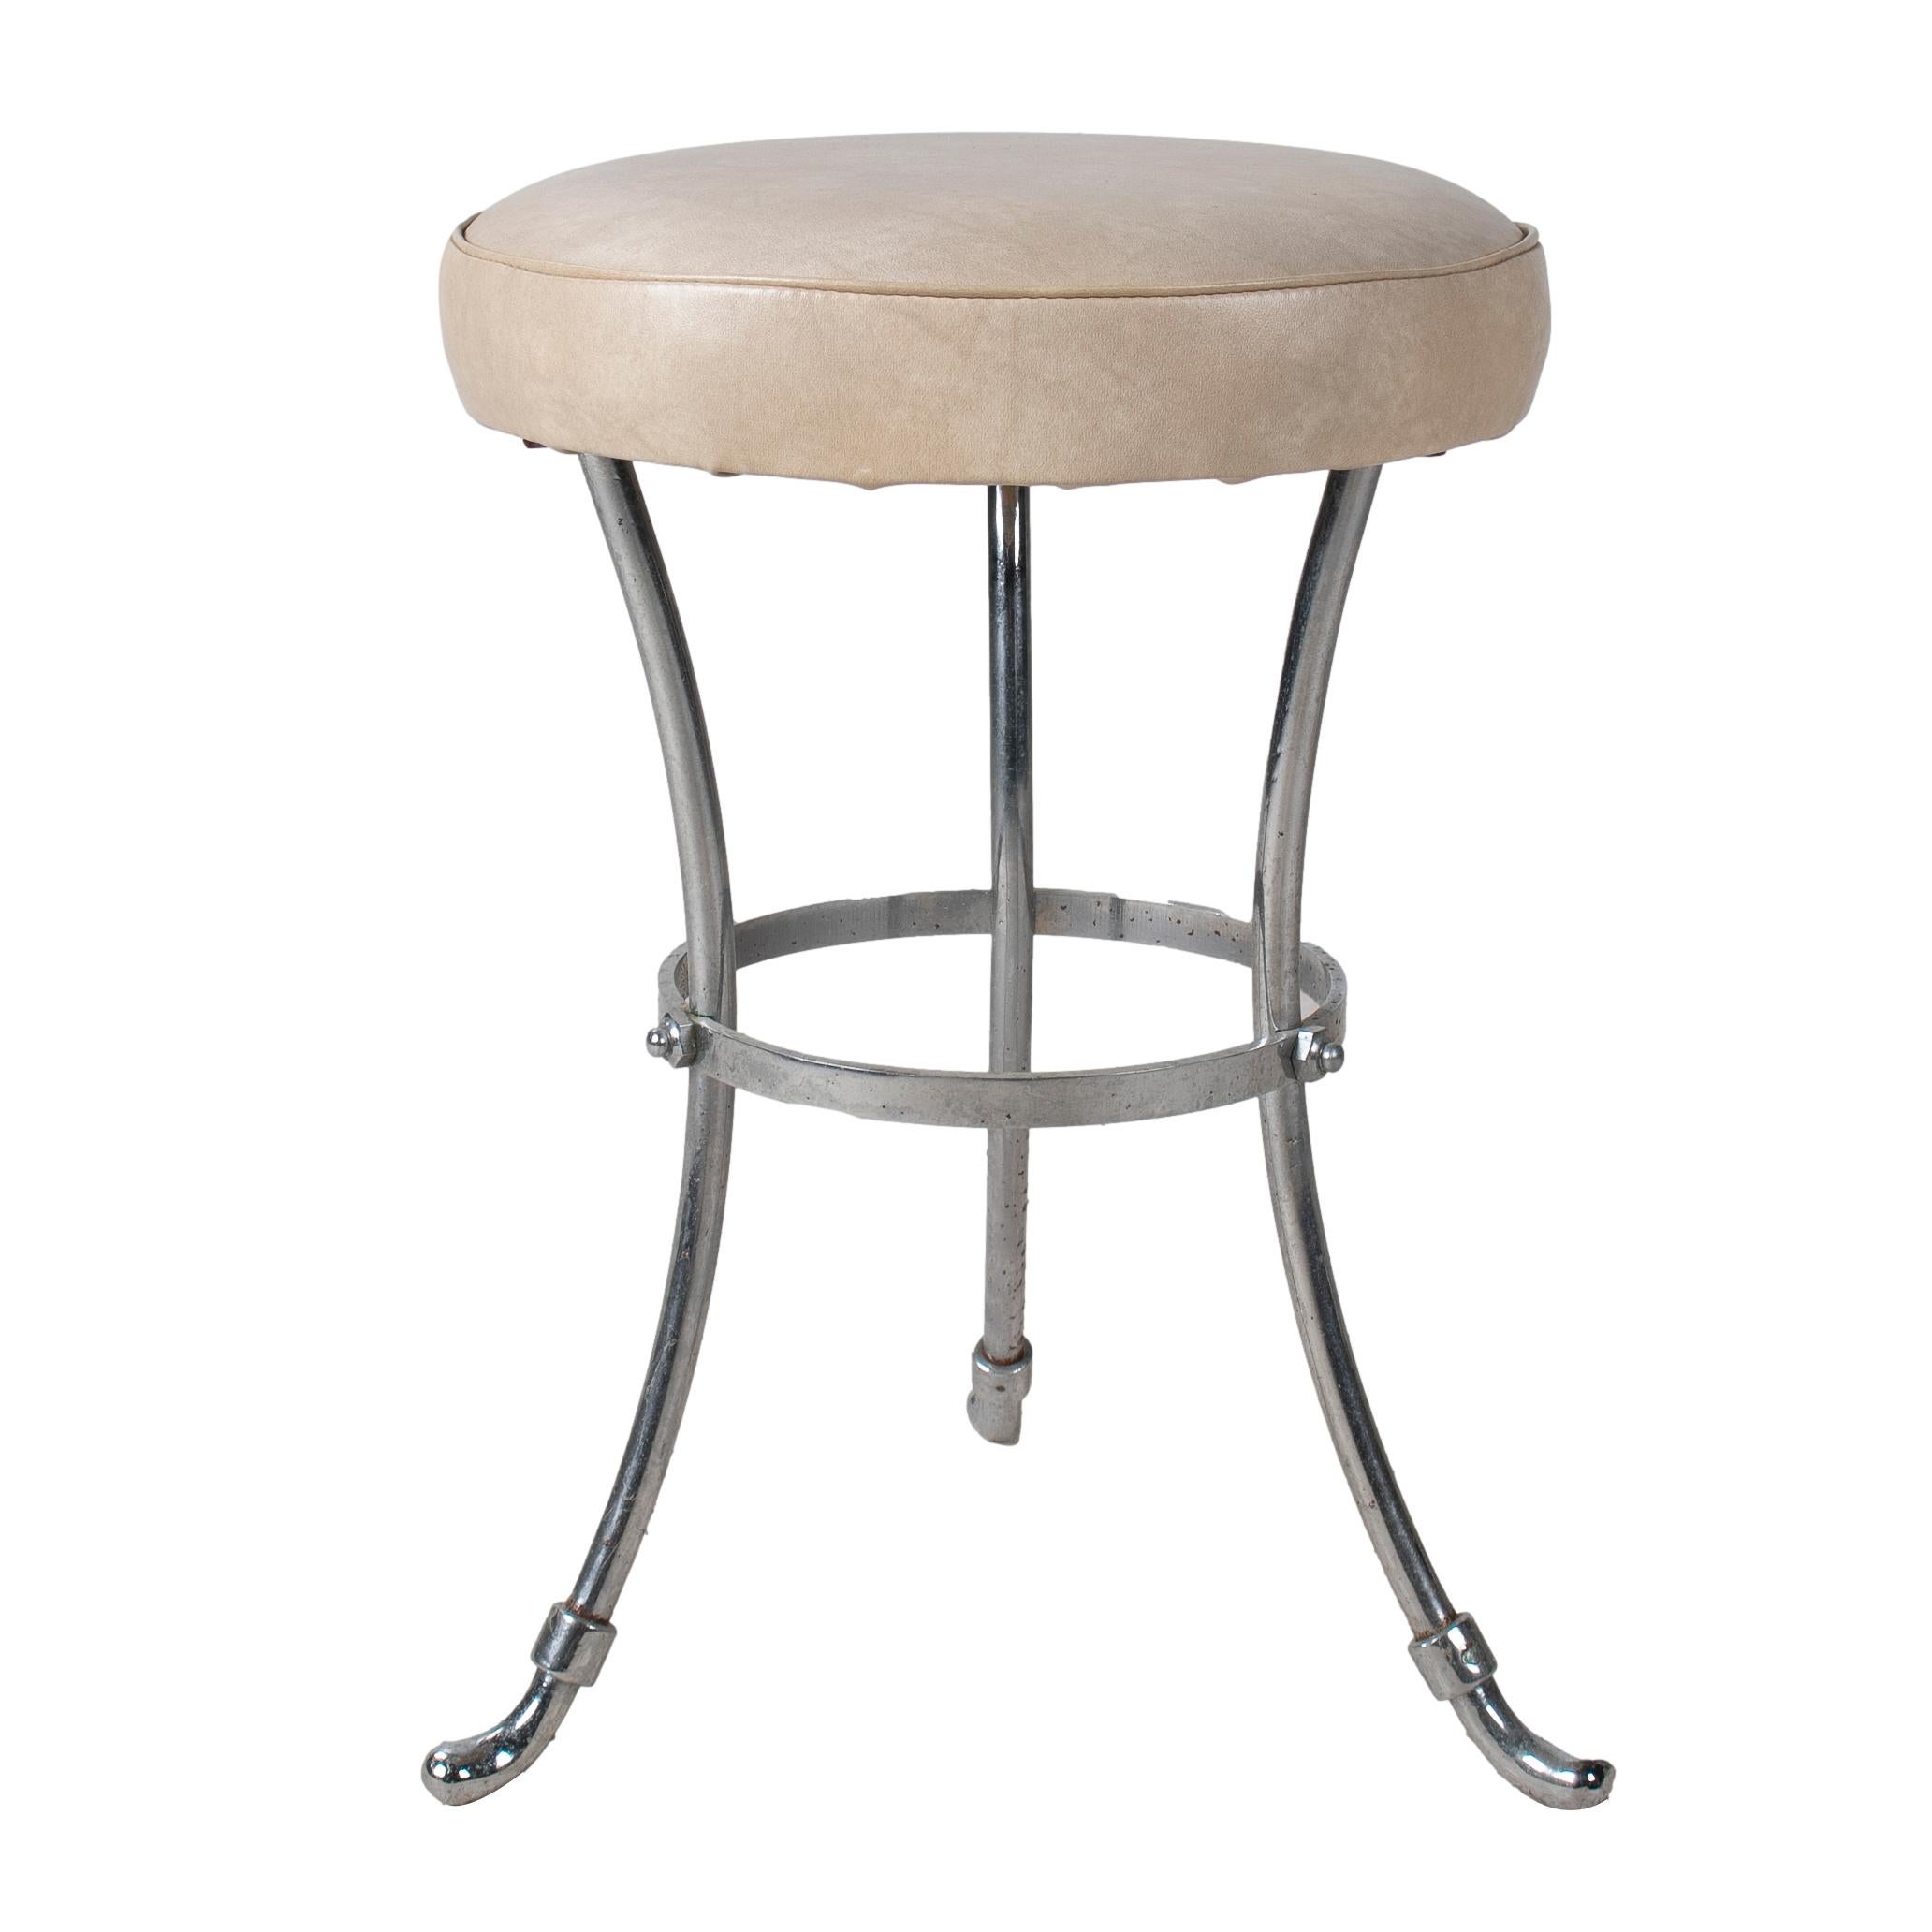 Vintage 1950s French faux leather steel stool.